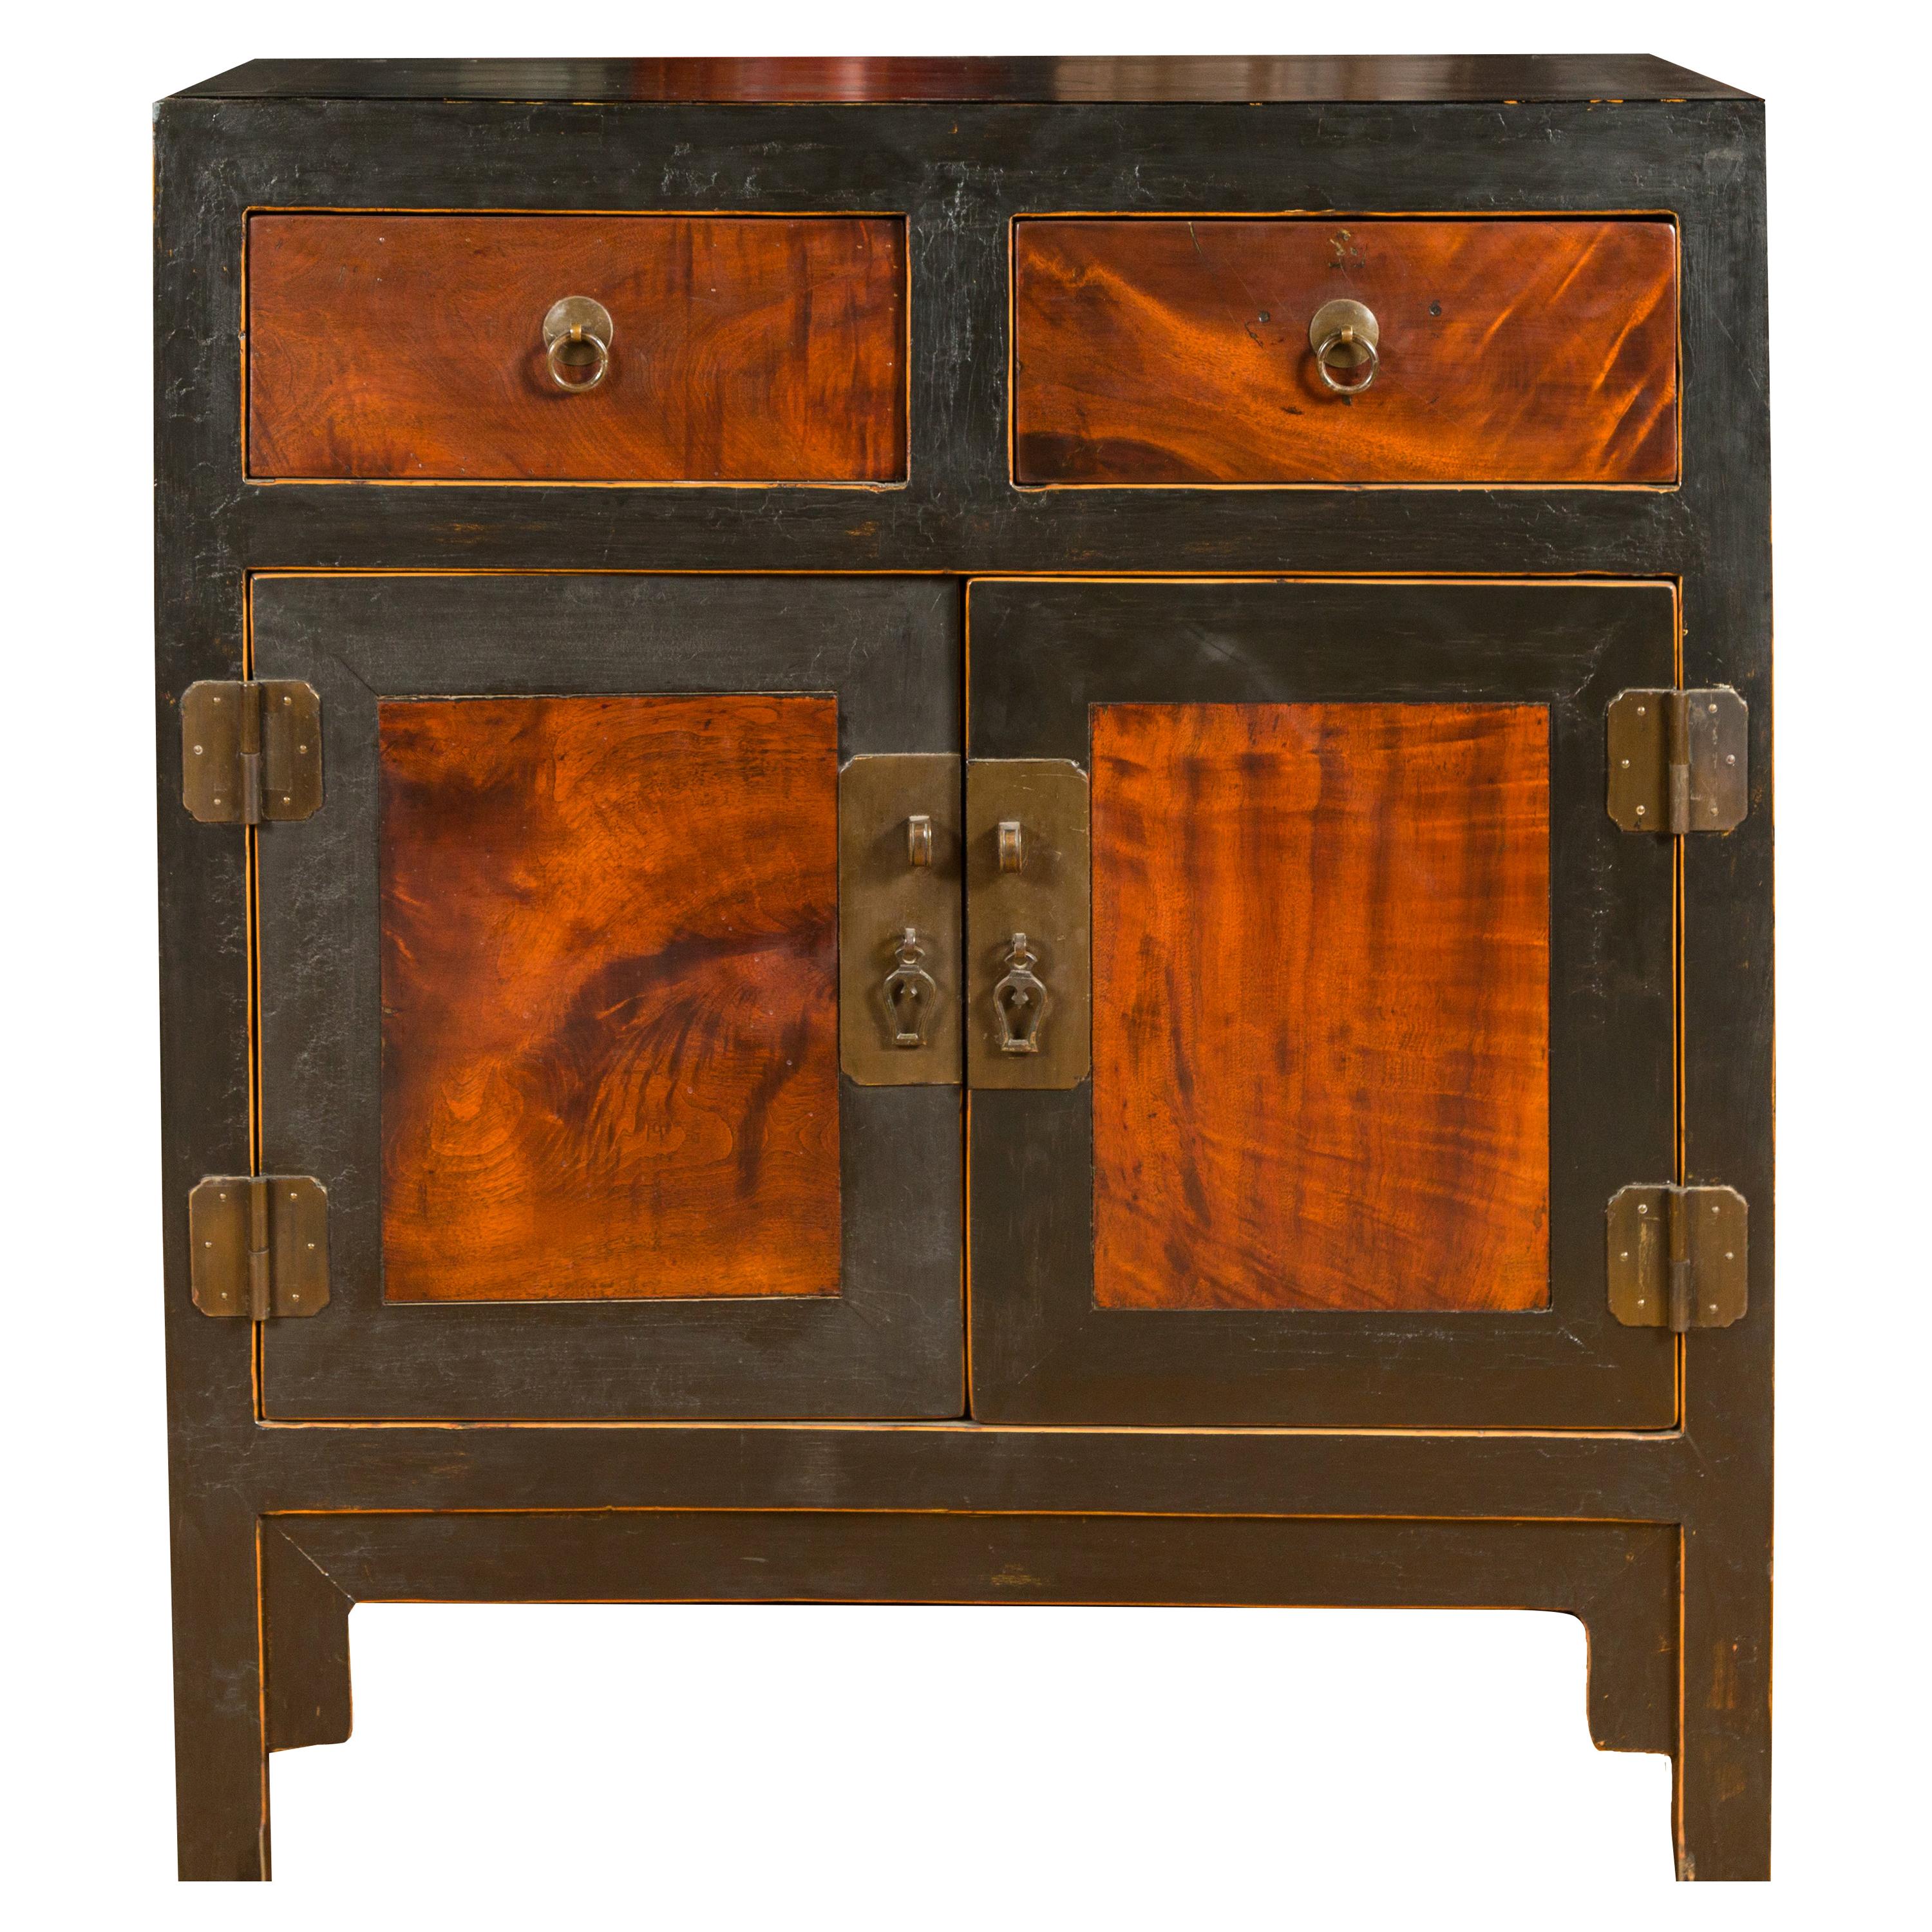 Qing Dynasty 19th Century Two-Toned Cabinet with Two Drawers Over Double Doors